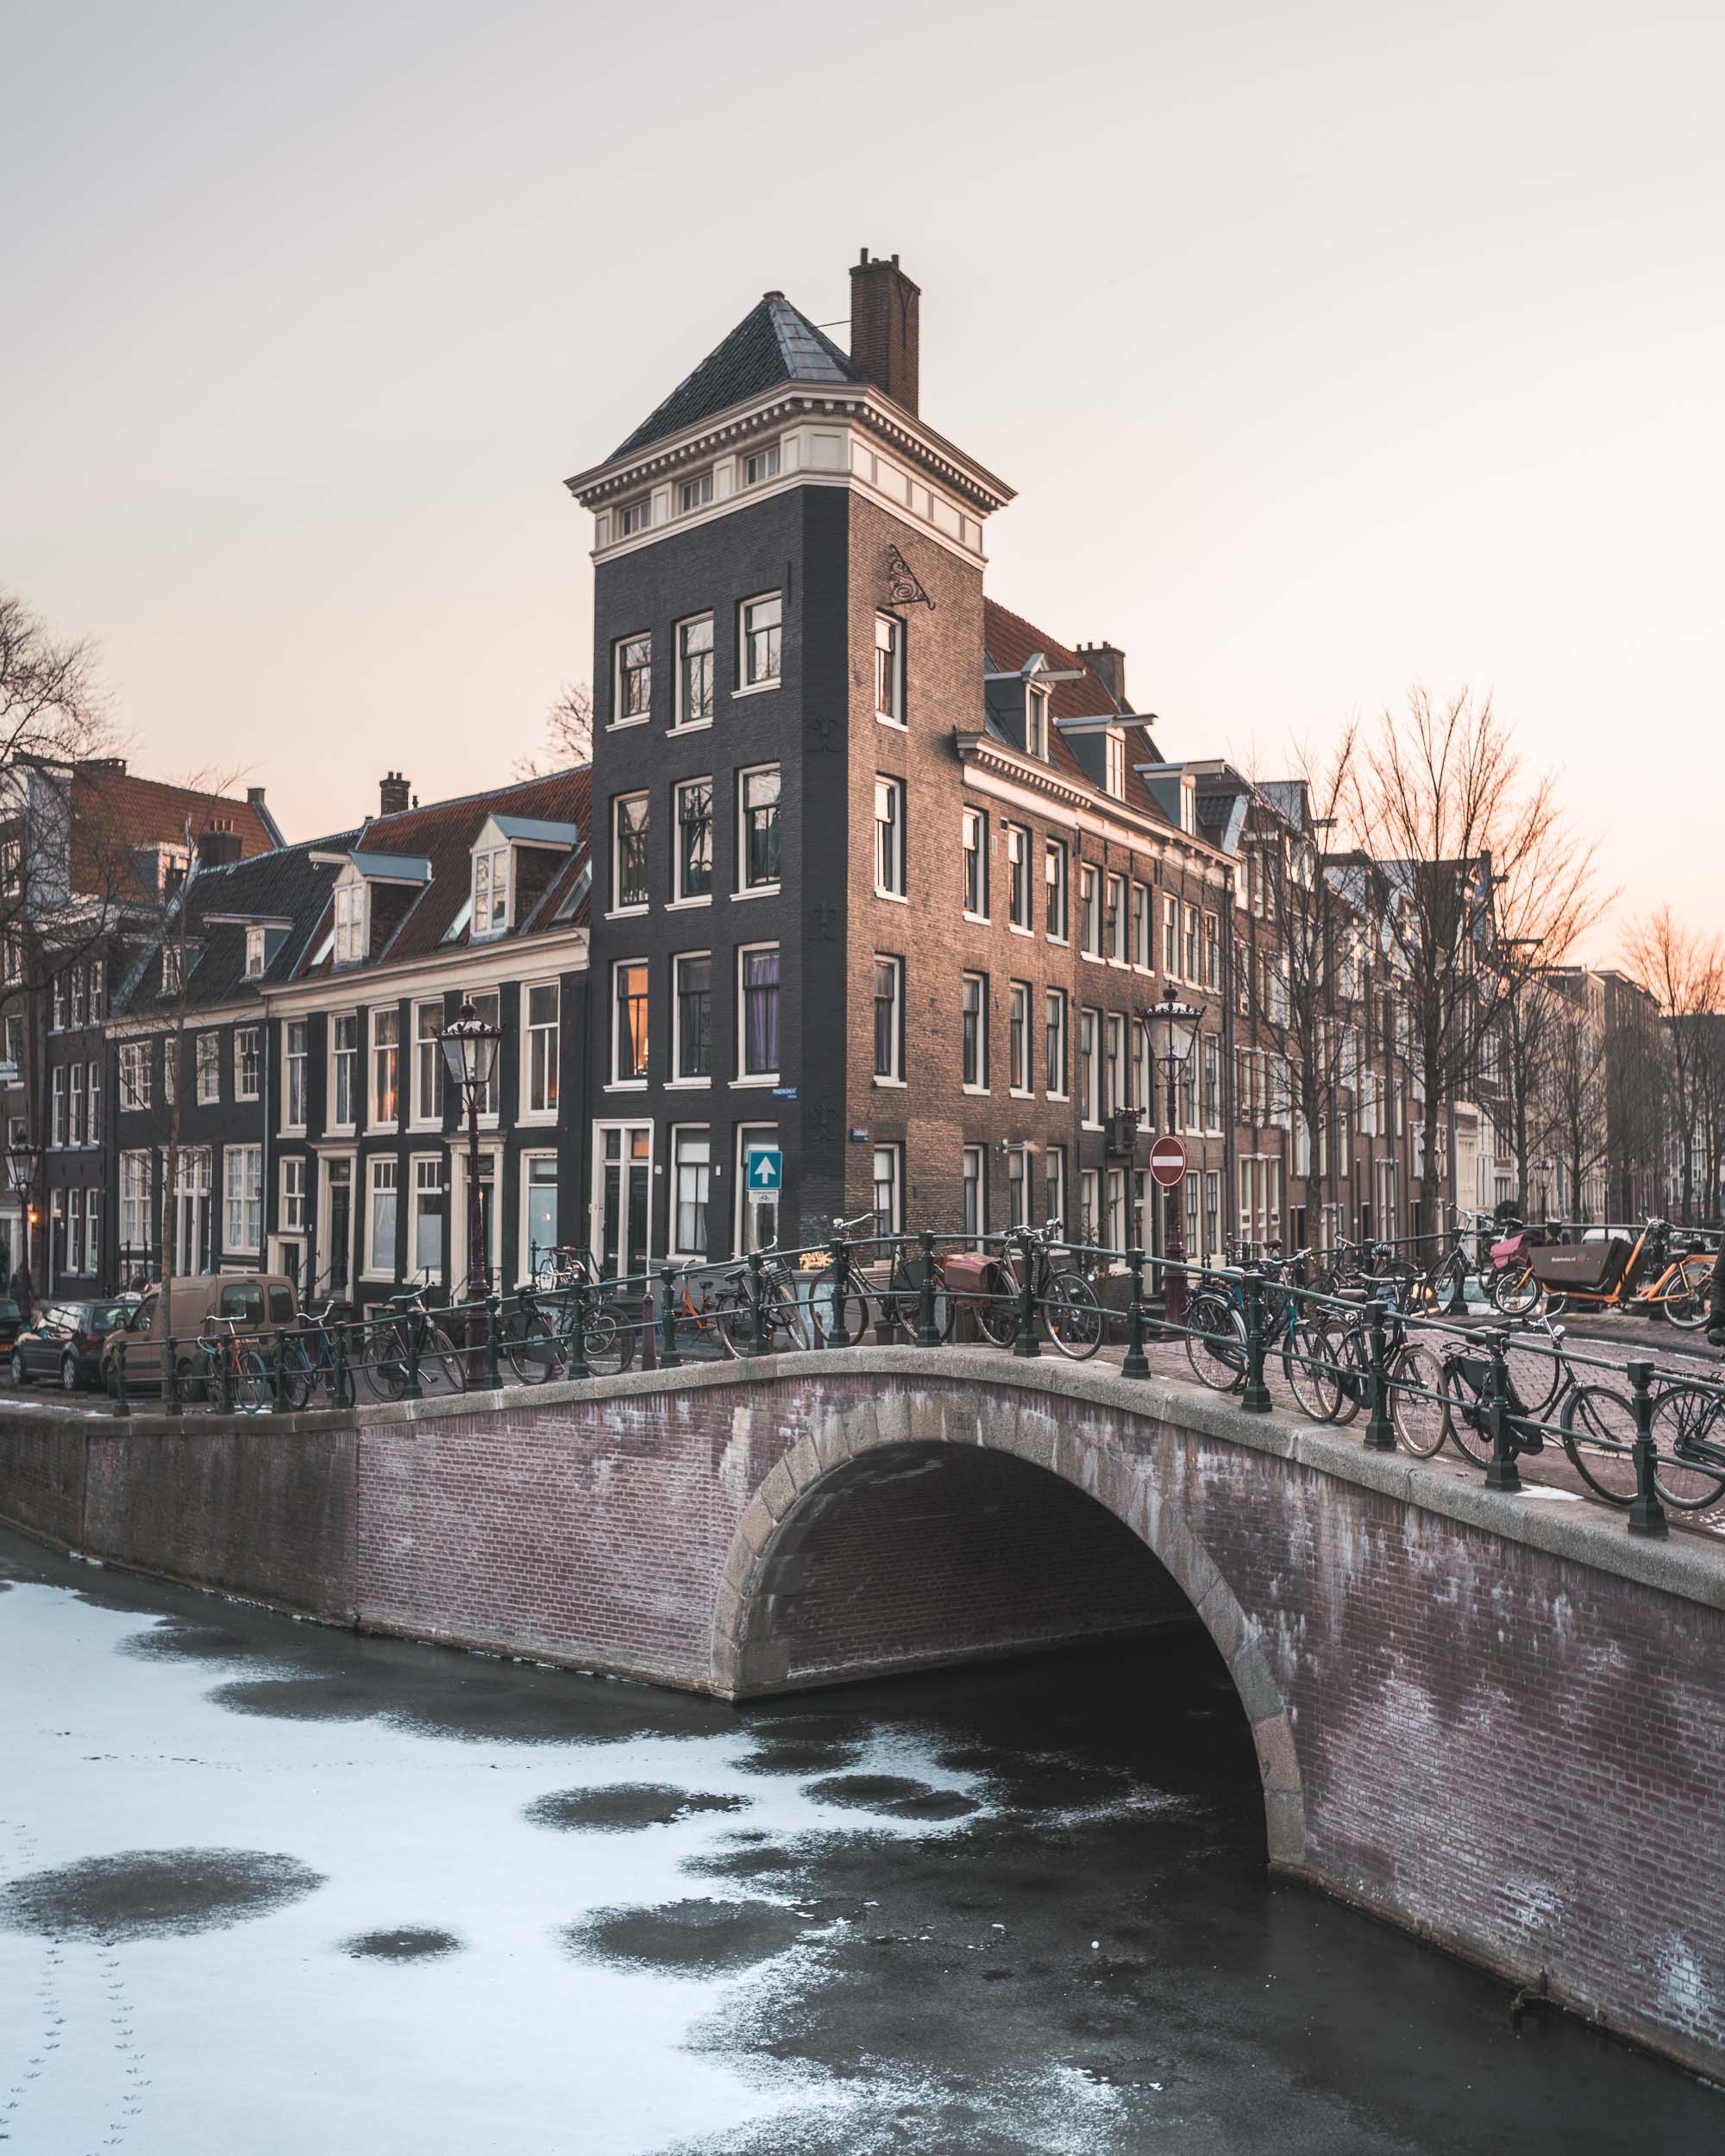 Frozen canals in winter at sunset in Amsterdam The Netherlands